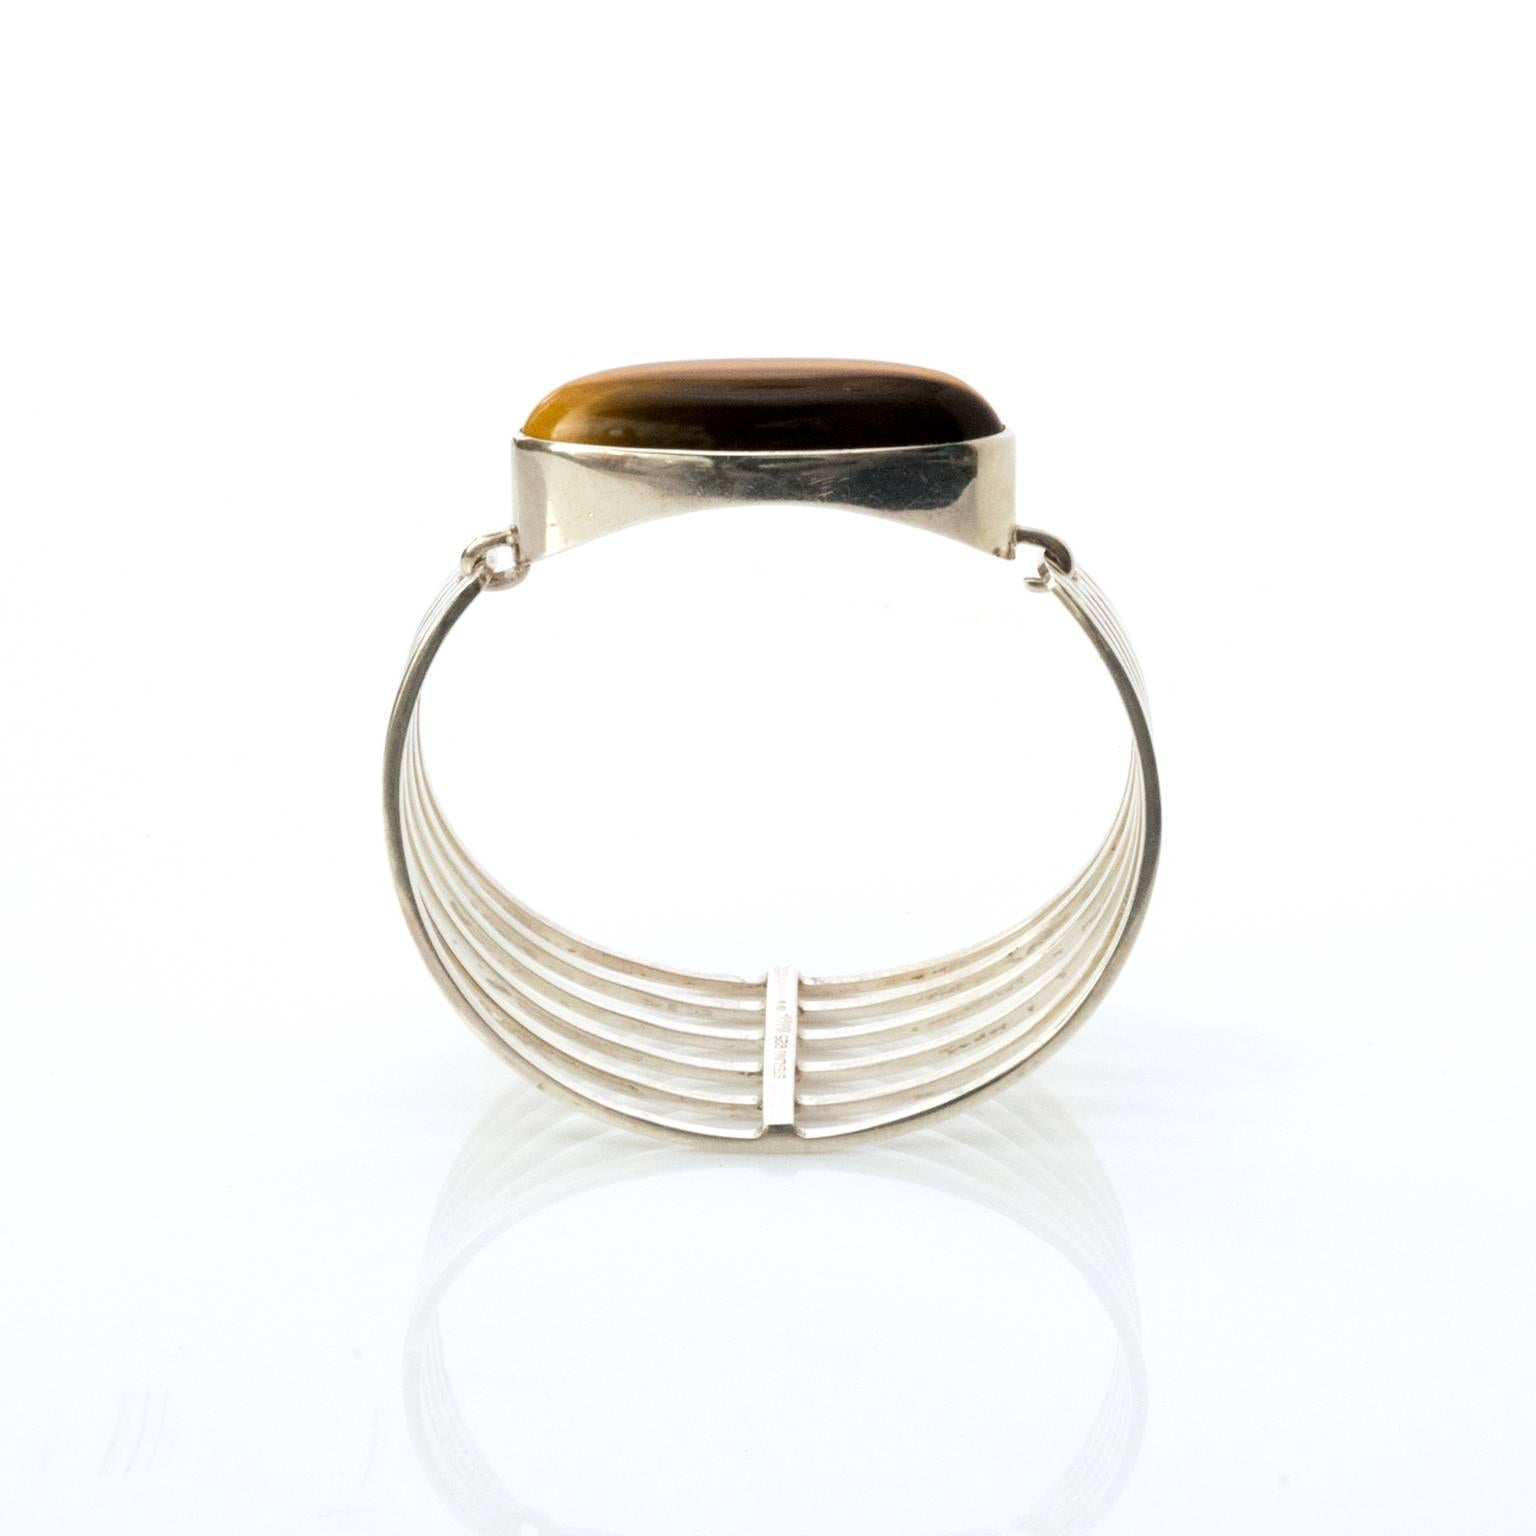 Scandinavian Modern Silver Bracelet with Tigers Eye Stone by Noblelle, Denmark In Excellent Condition For Sale In New York, NY